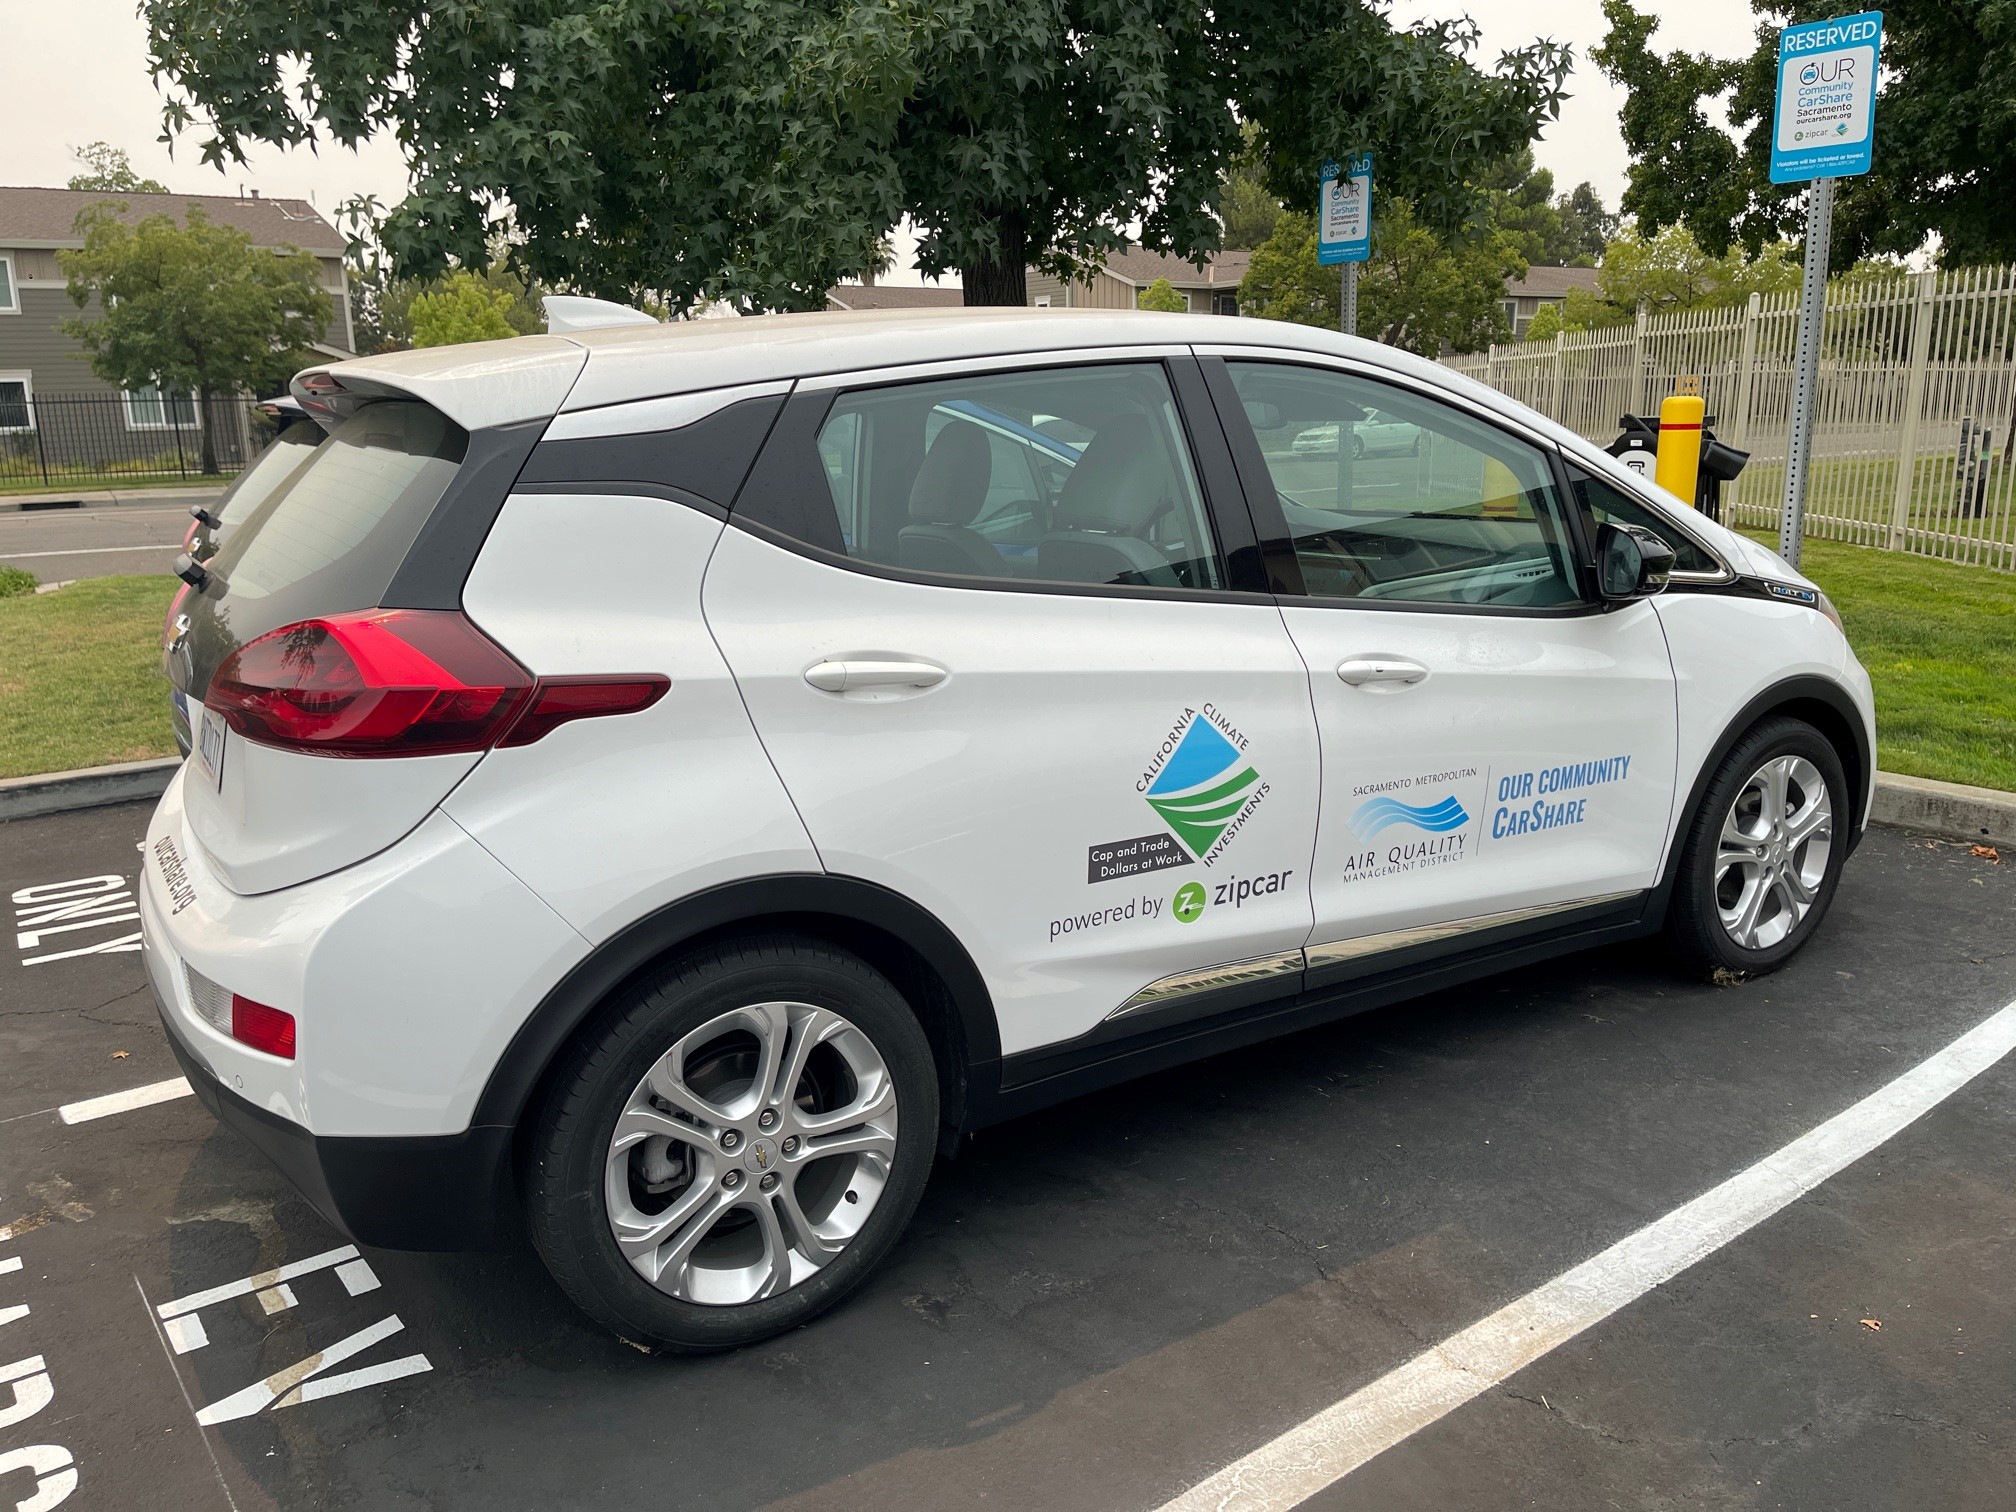 Side and rear view of parked white Chevy Bolt with Our Community Carshare logo